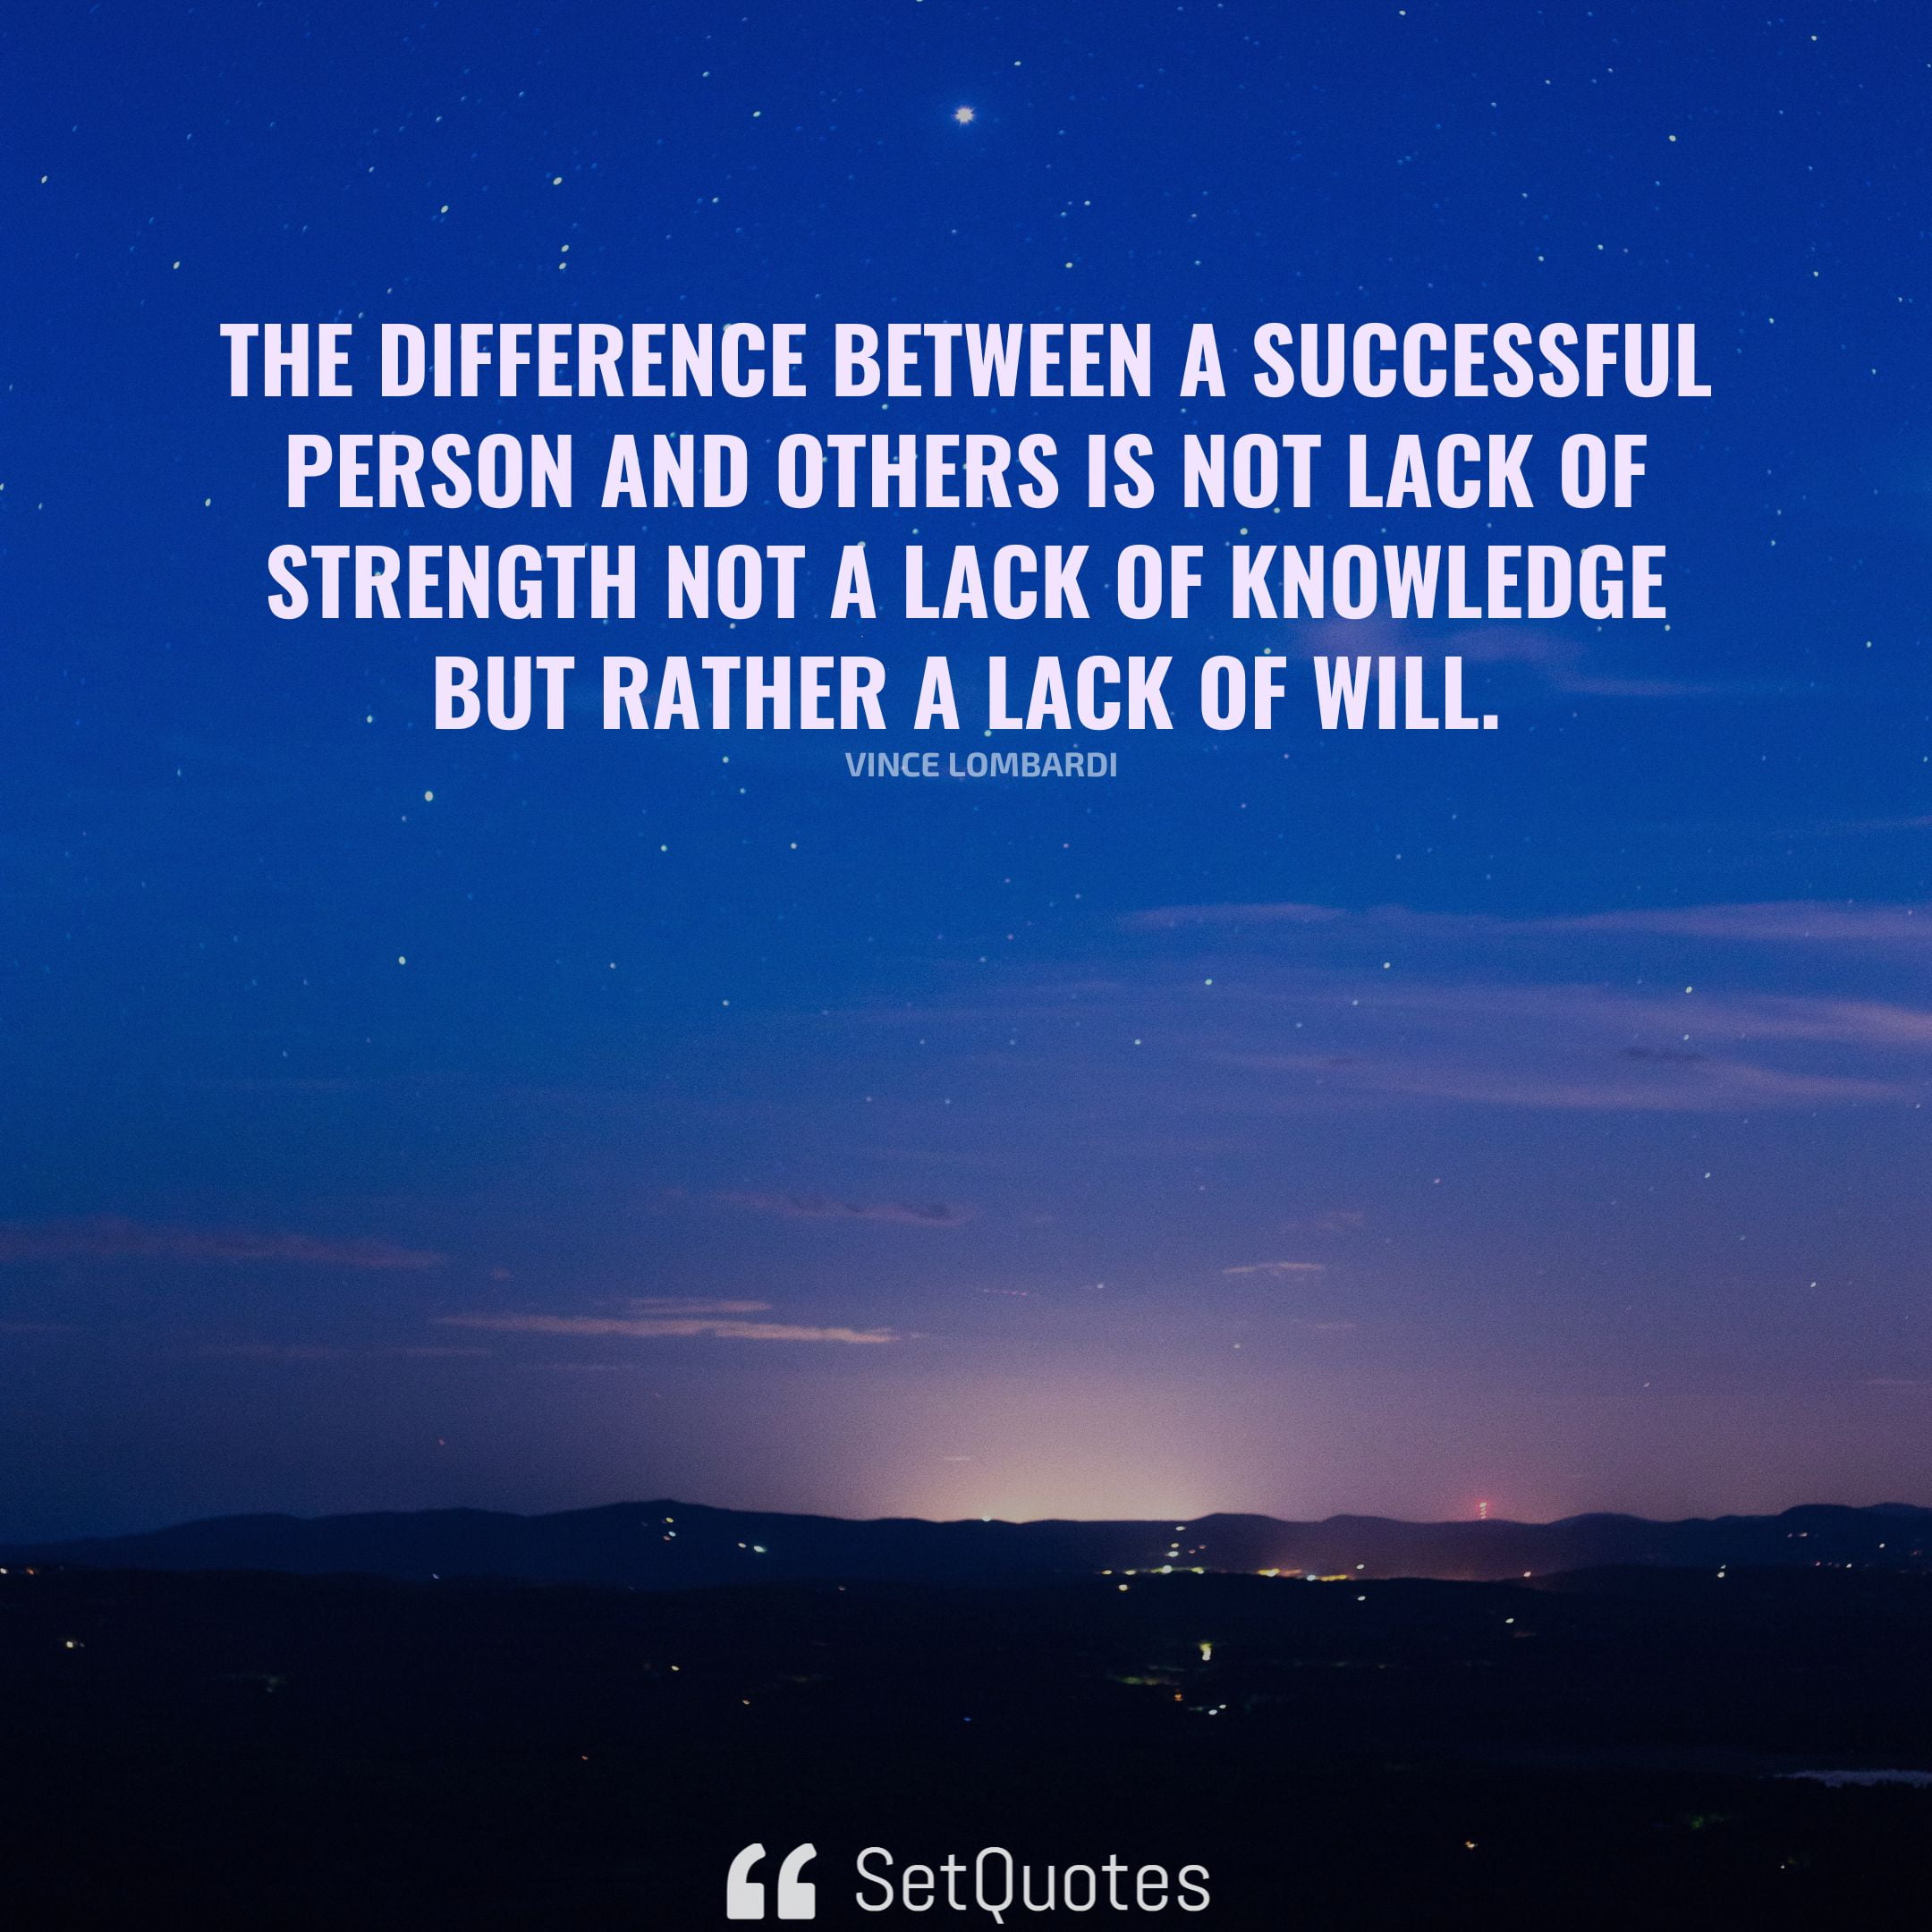 The difference between a successful person and others is not lack of strength not a lack of knowledge but rather a lack of will. – Vince Lombardi